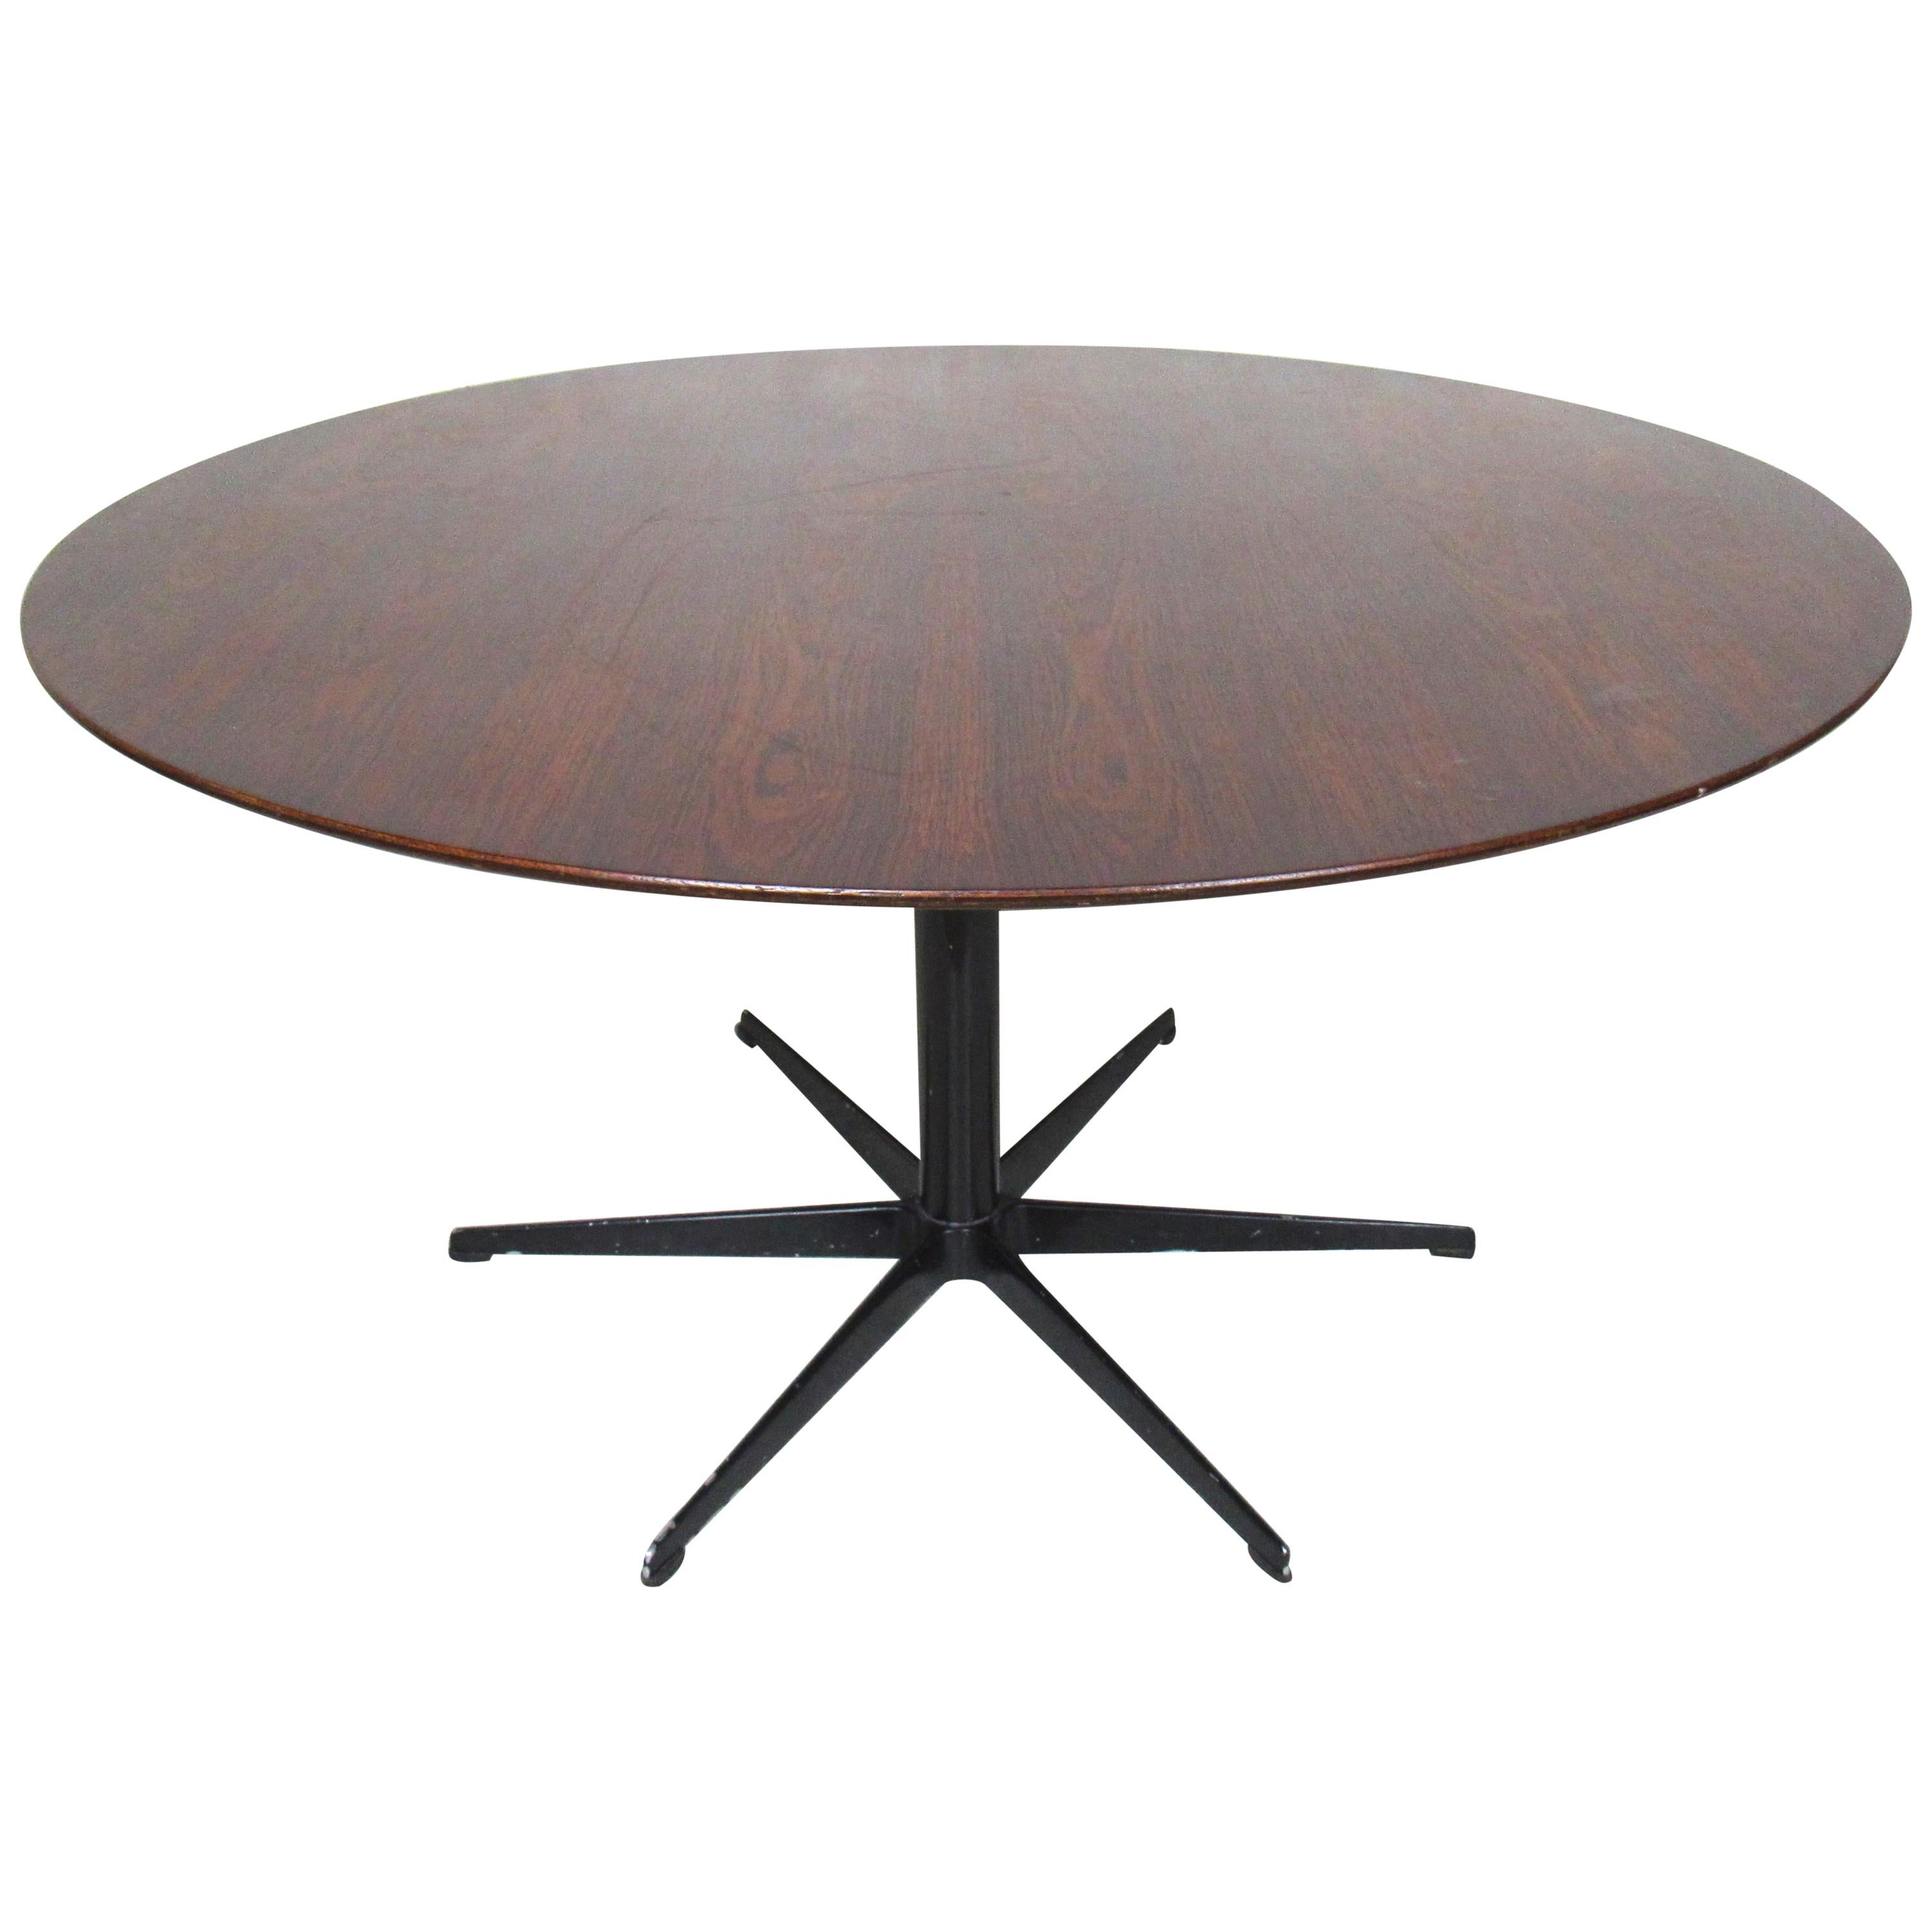 Six Star Series Rosewood Table by Arne Jacobsen for Fritz Hansen